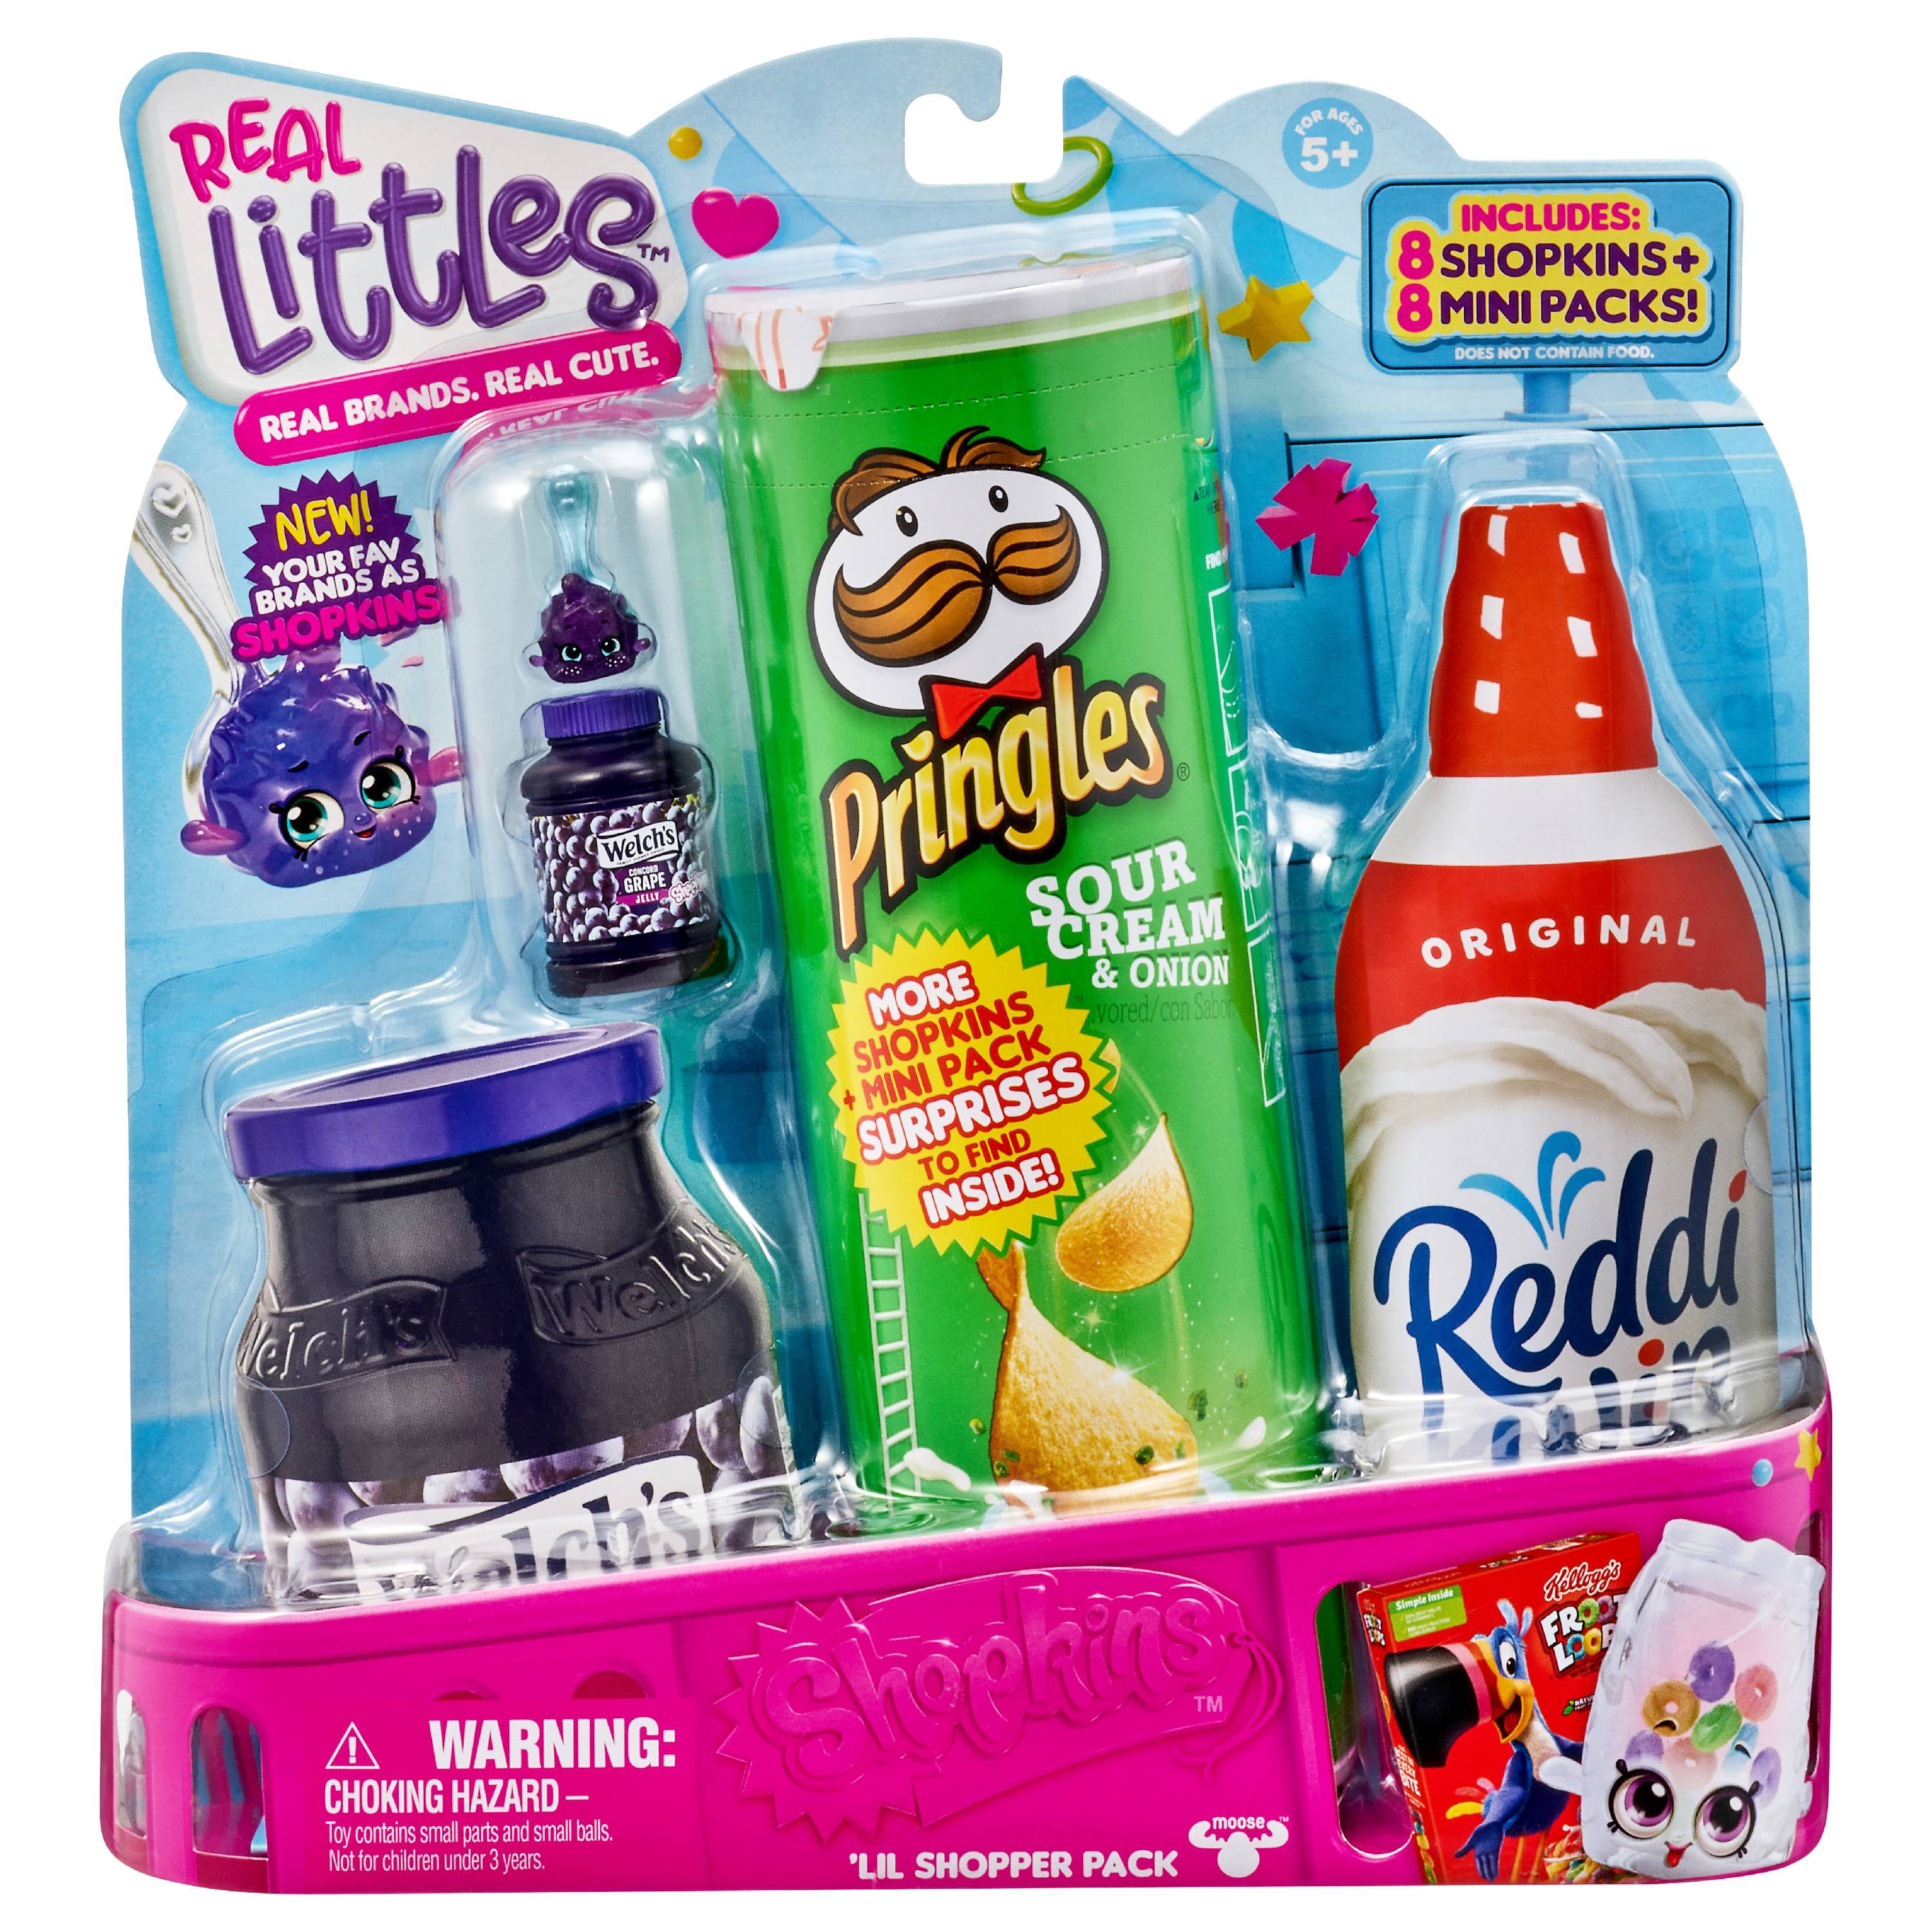 Shopkins Real Littles Variety  17 Real Littles Plus 17 Real Branded Mini  Packs (34 Total Pieces). Style May Vary, Toys for Kids, Girls, Ages 5+ 